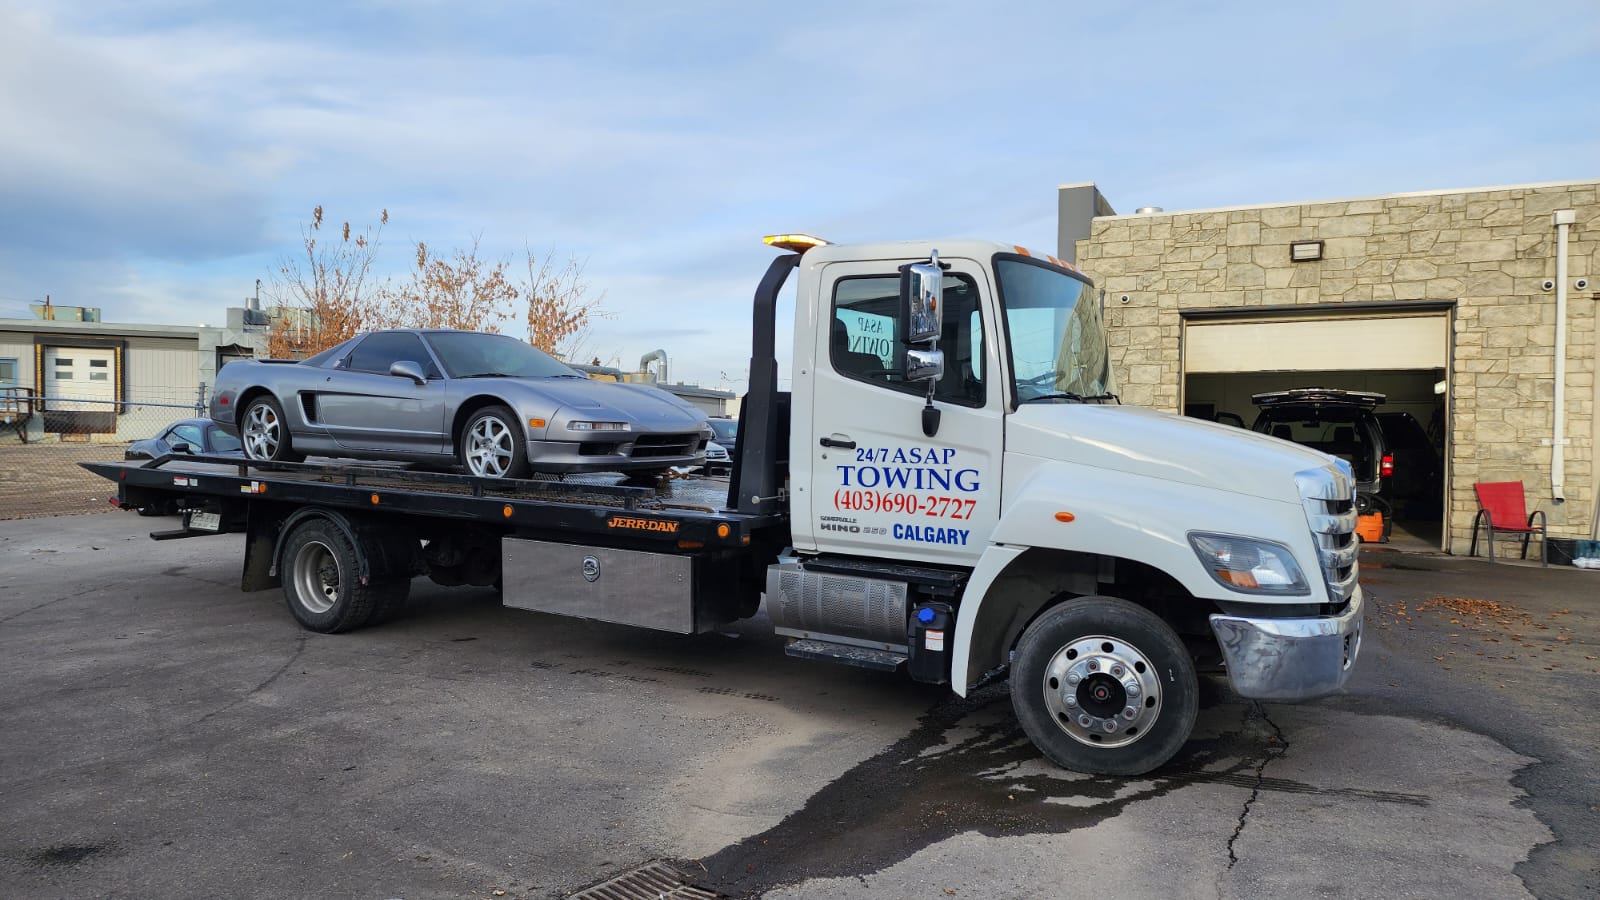 Call A Tow Truck For Urgent Towing In Calgary - Asap Towing Calgary